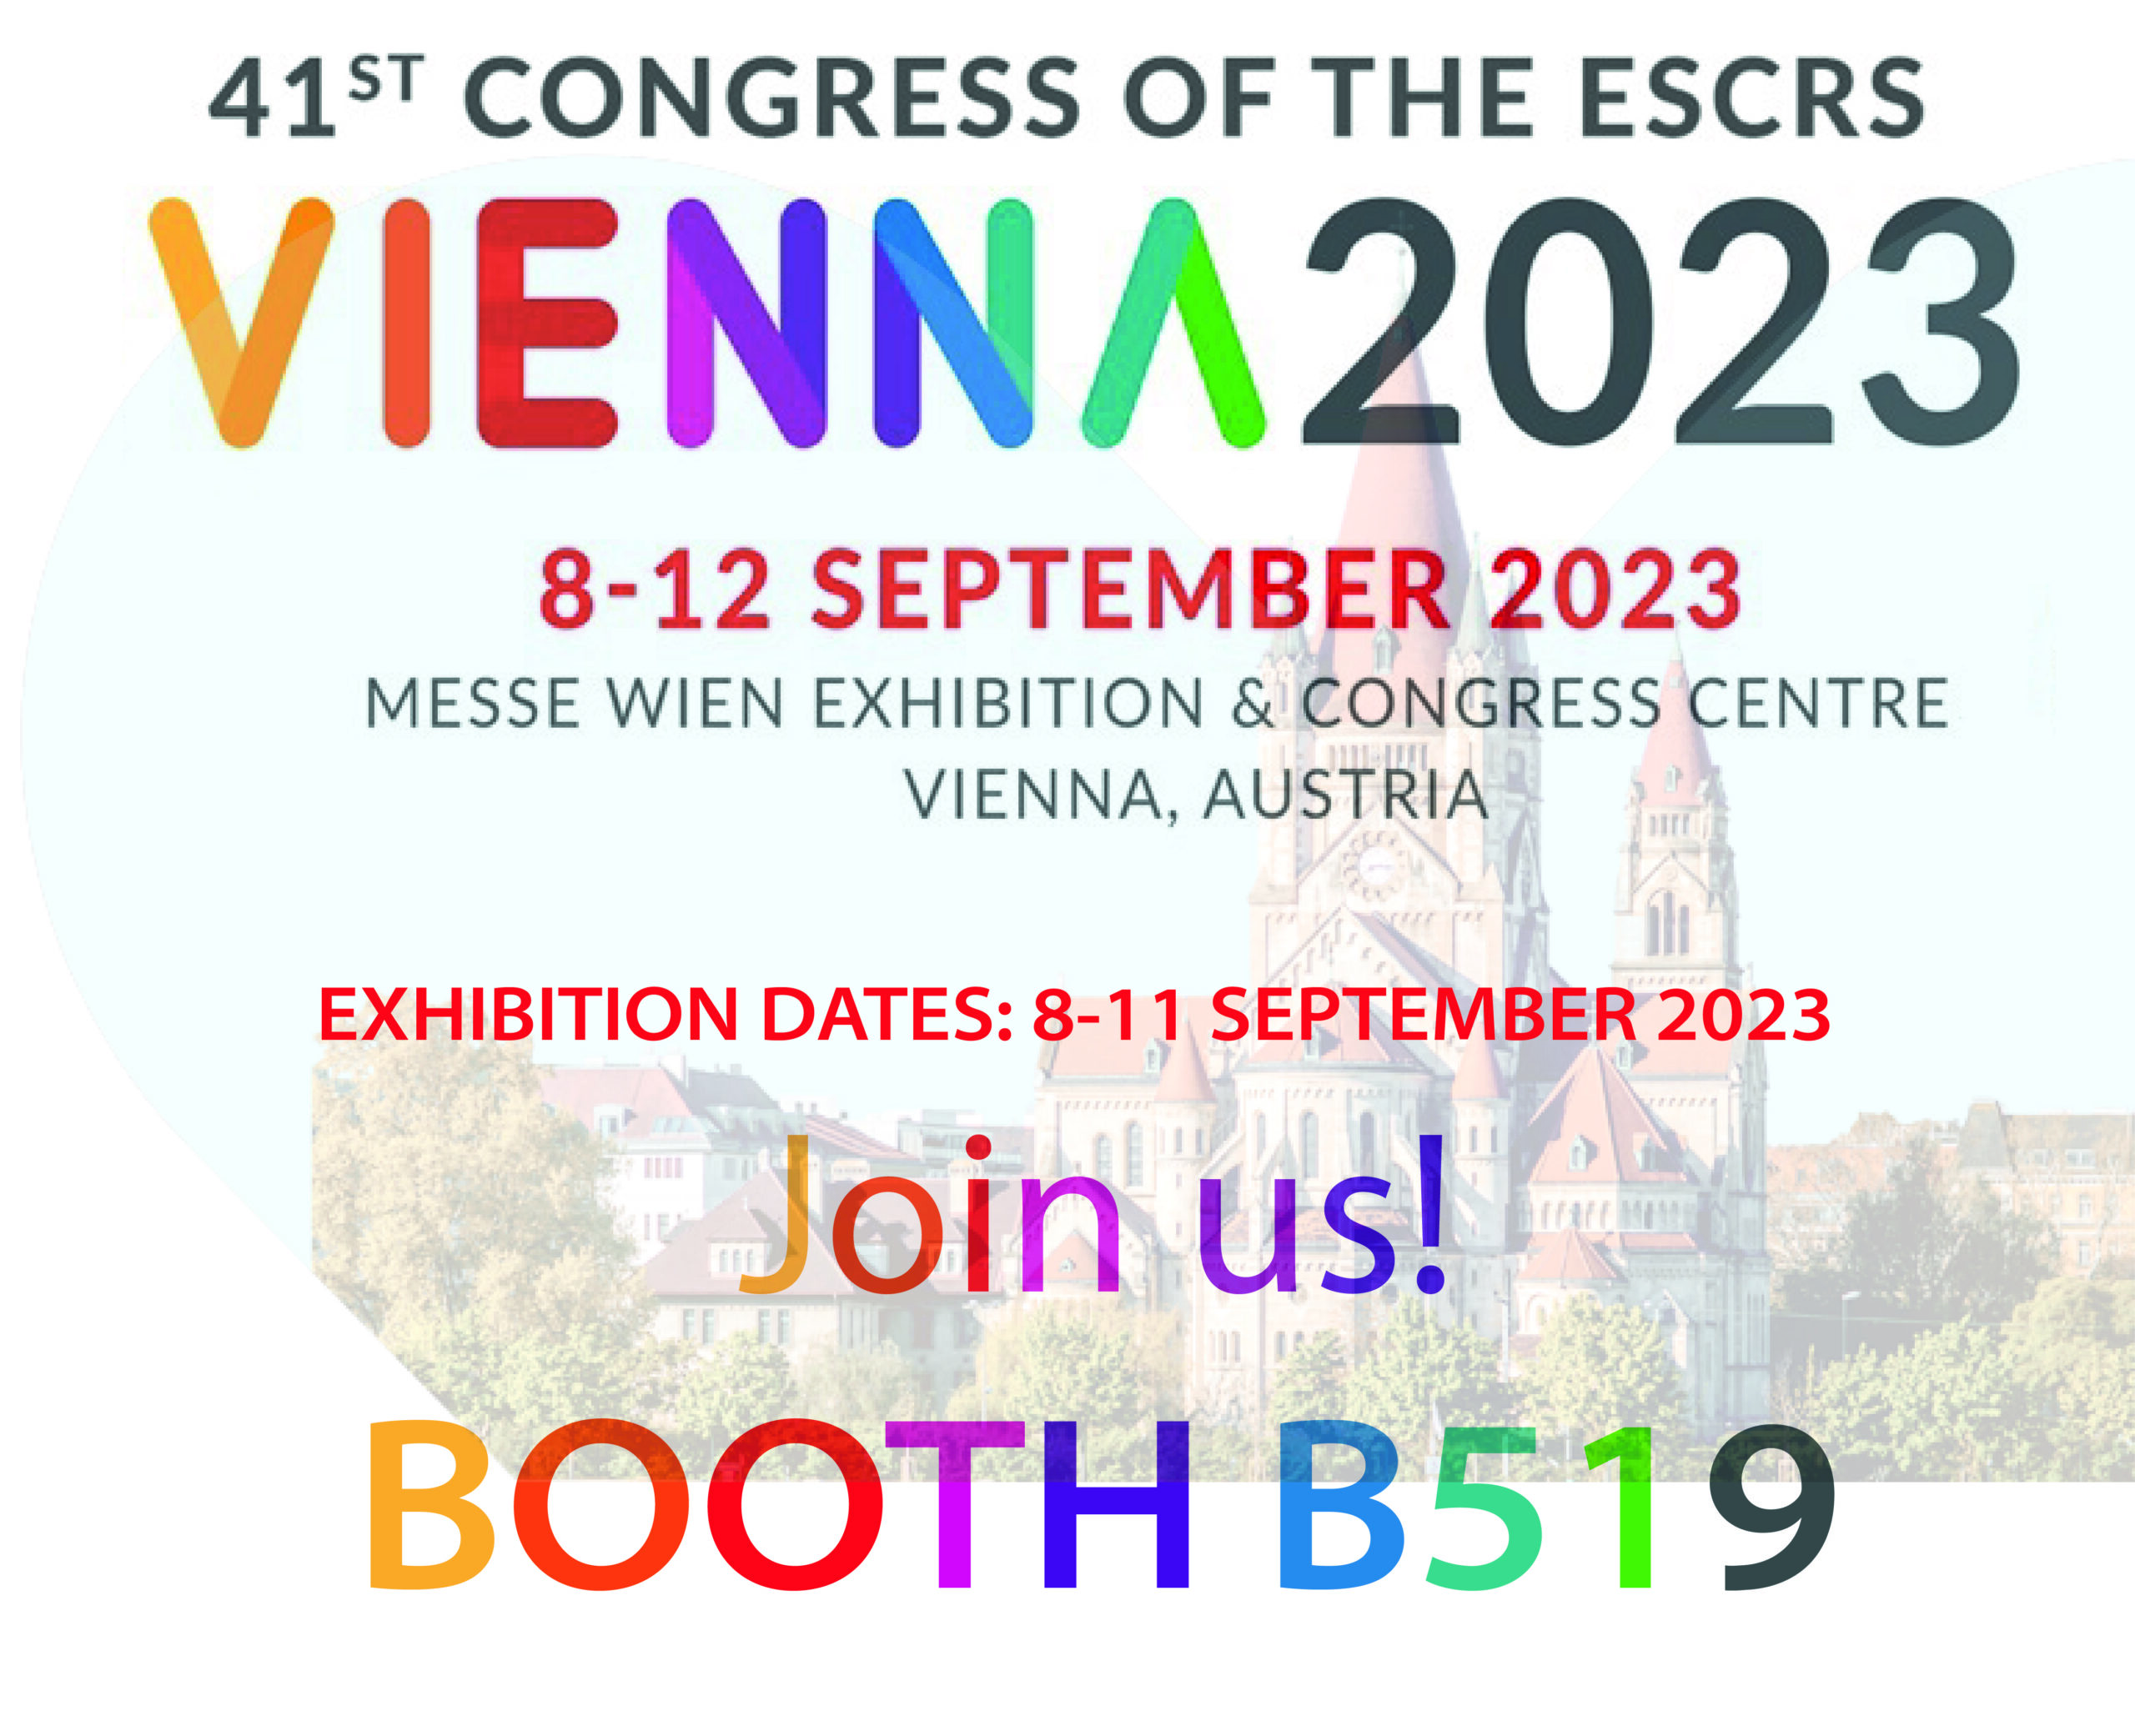 We are exhibiting at ESCRS 2023!